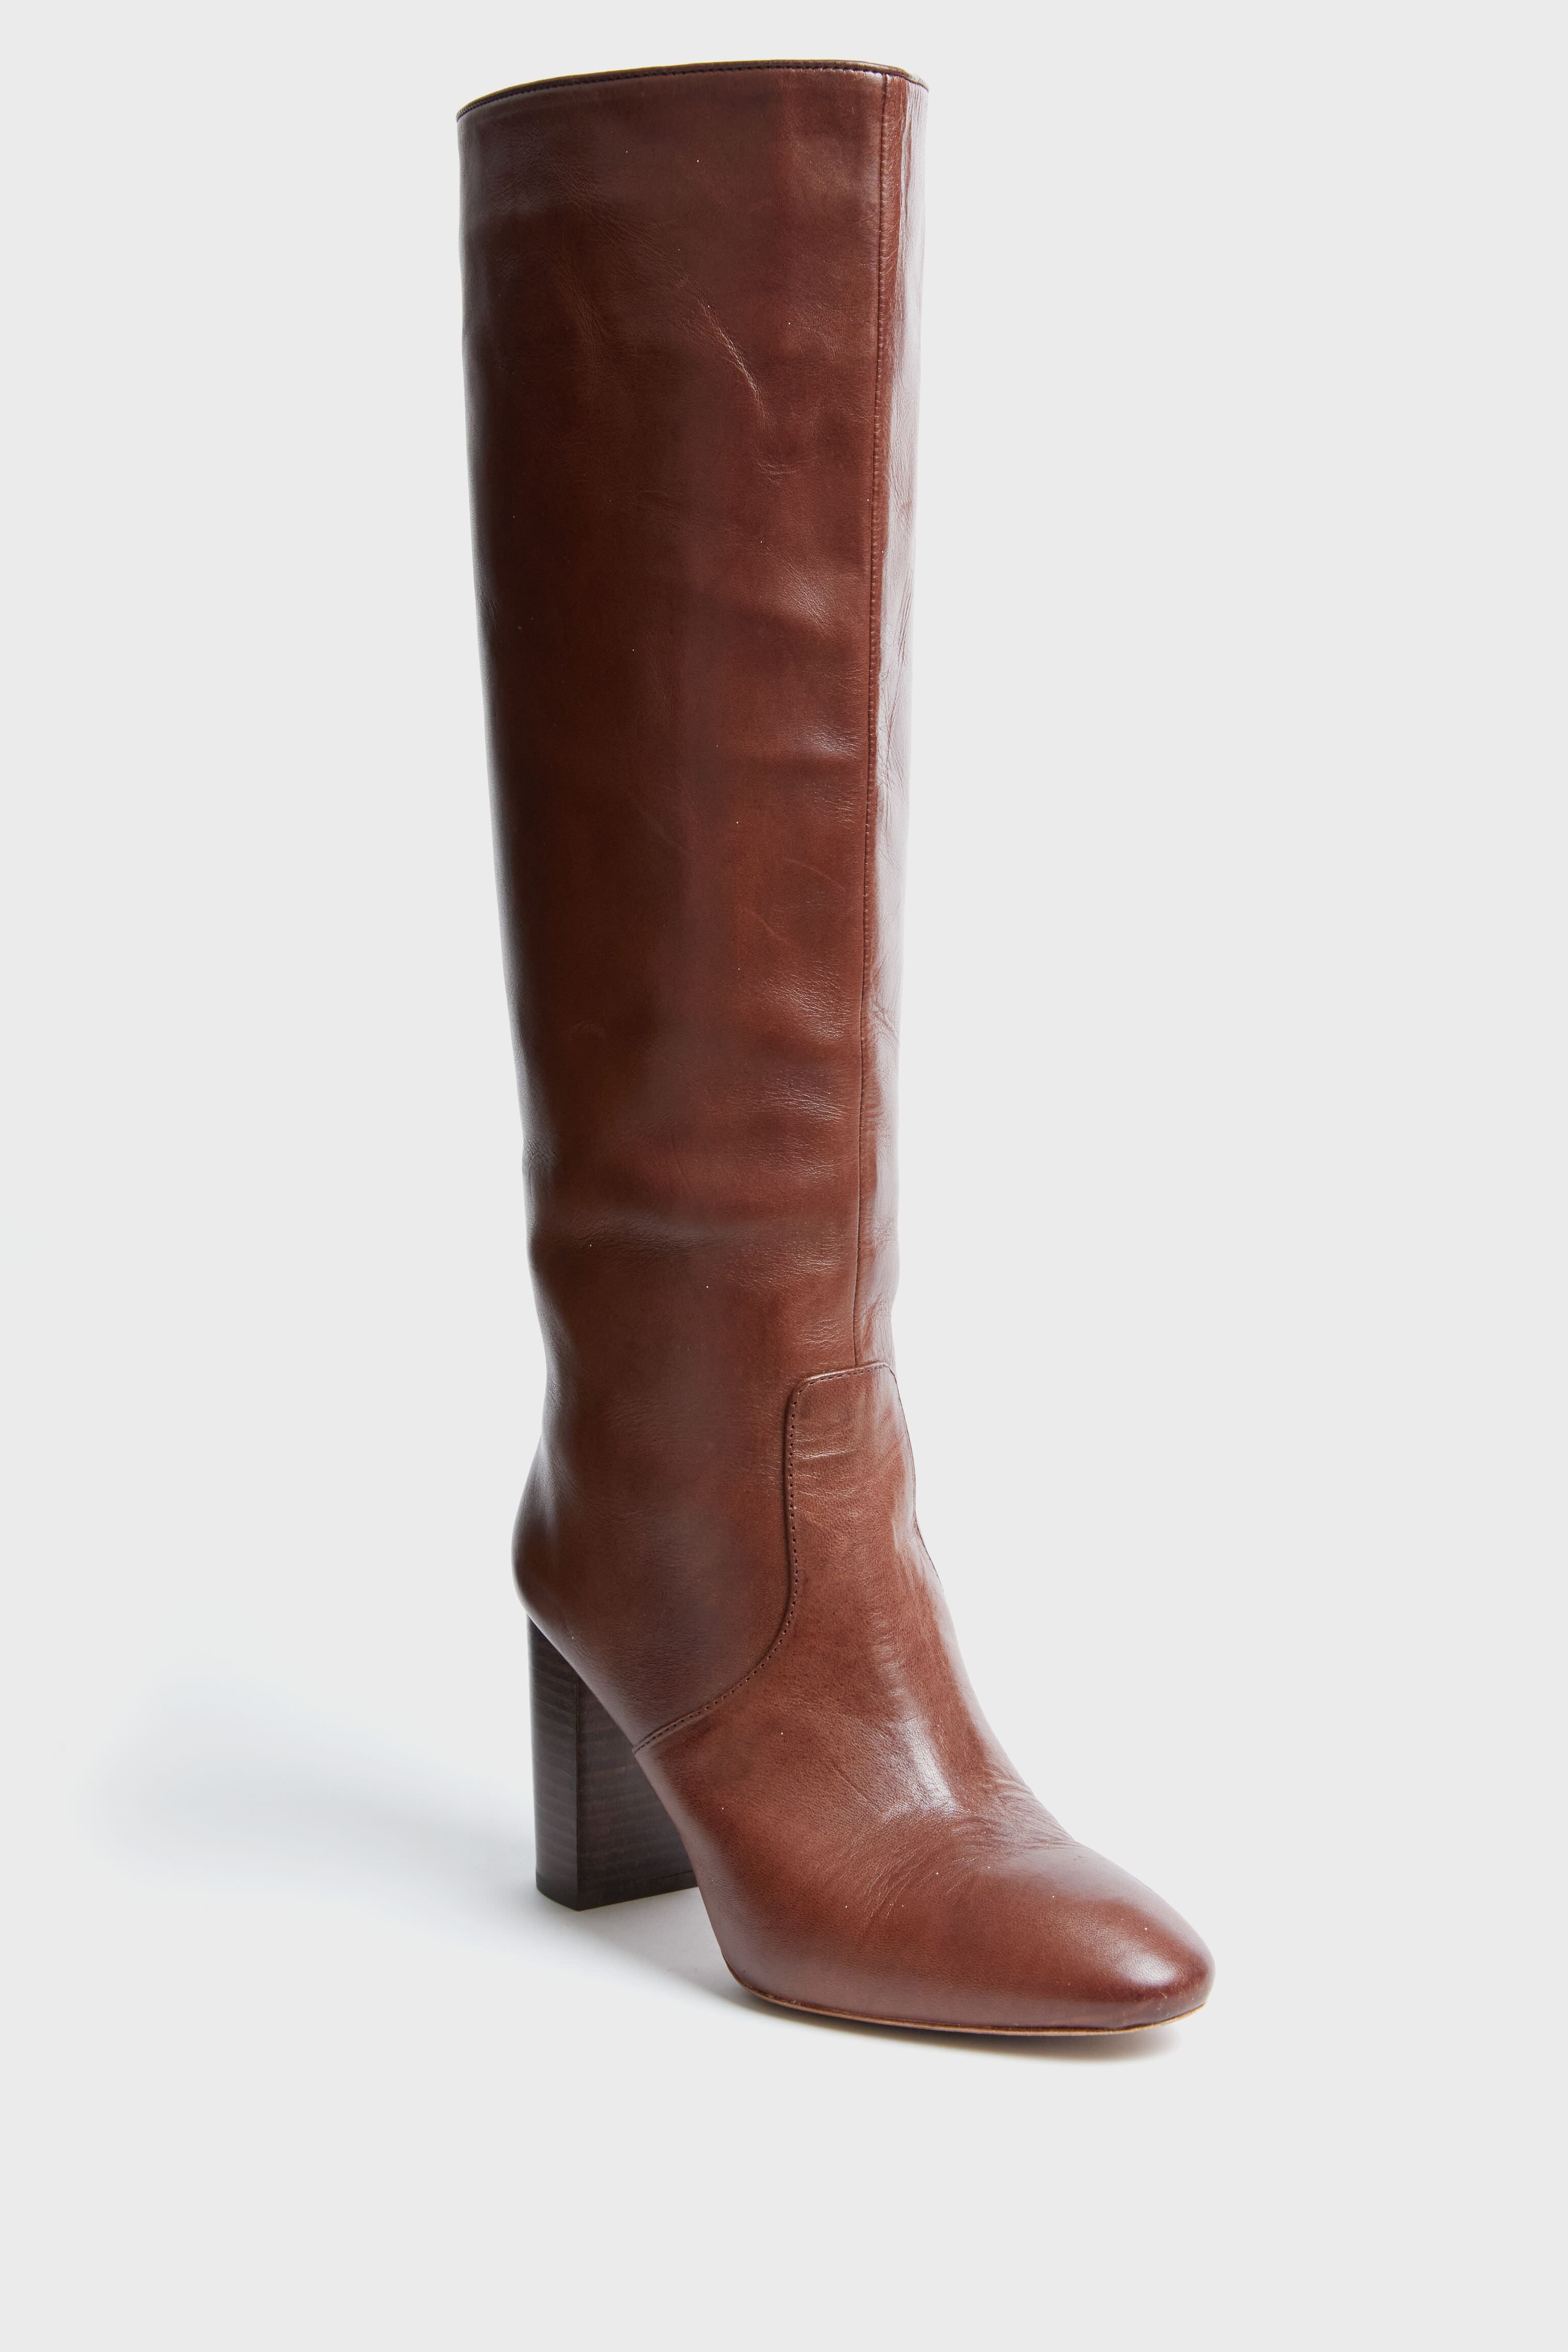 Frye and Co. Womens Lillian Stacked Heel Riding Boots - JCPenney